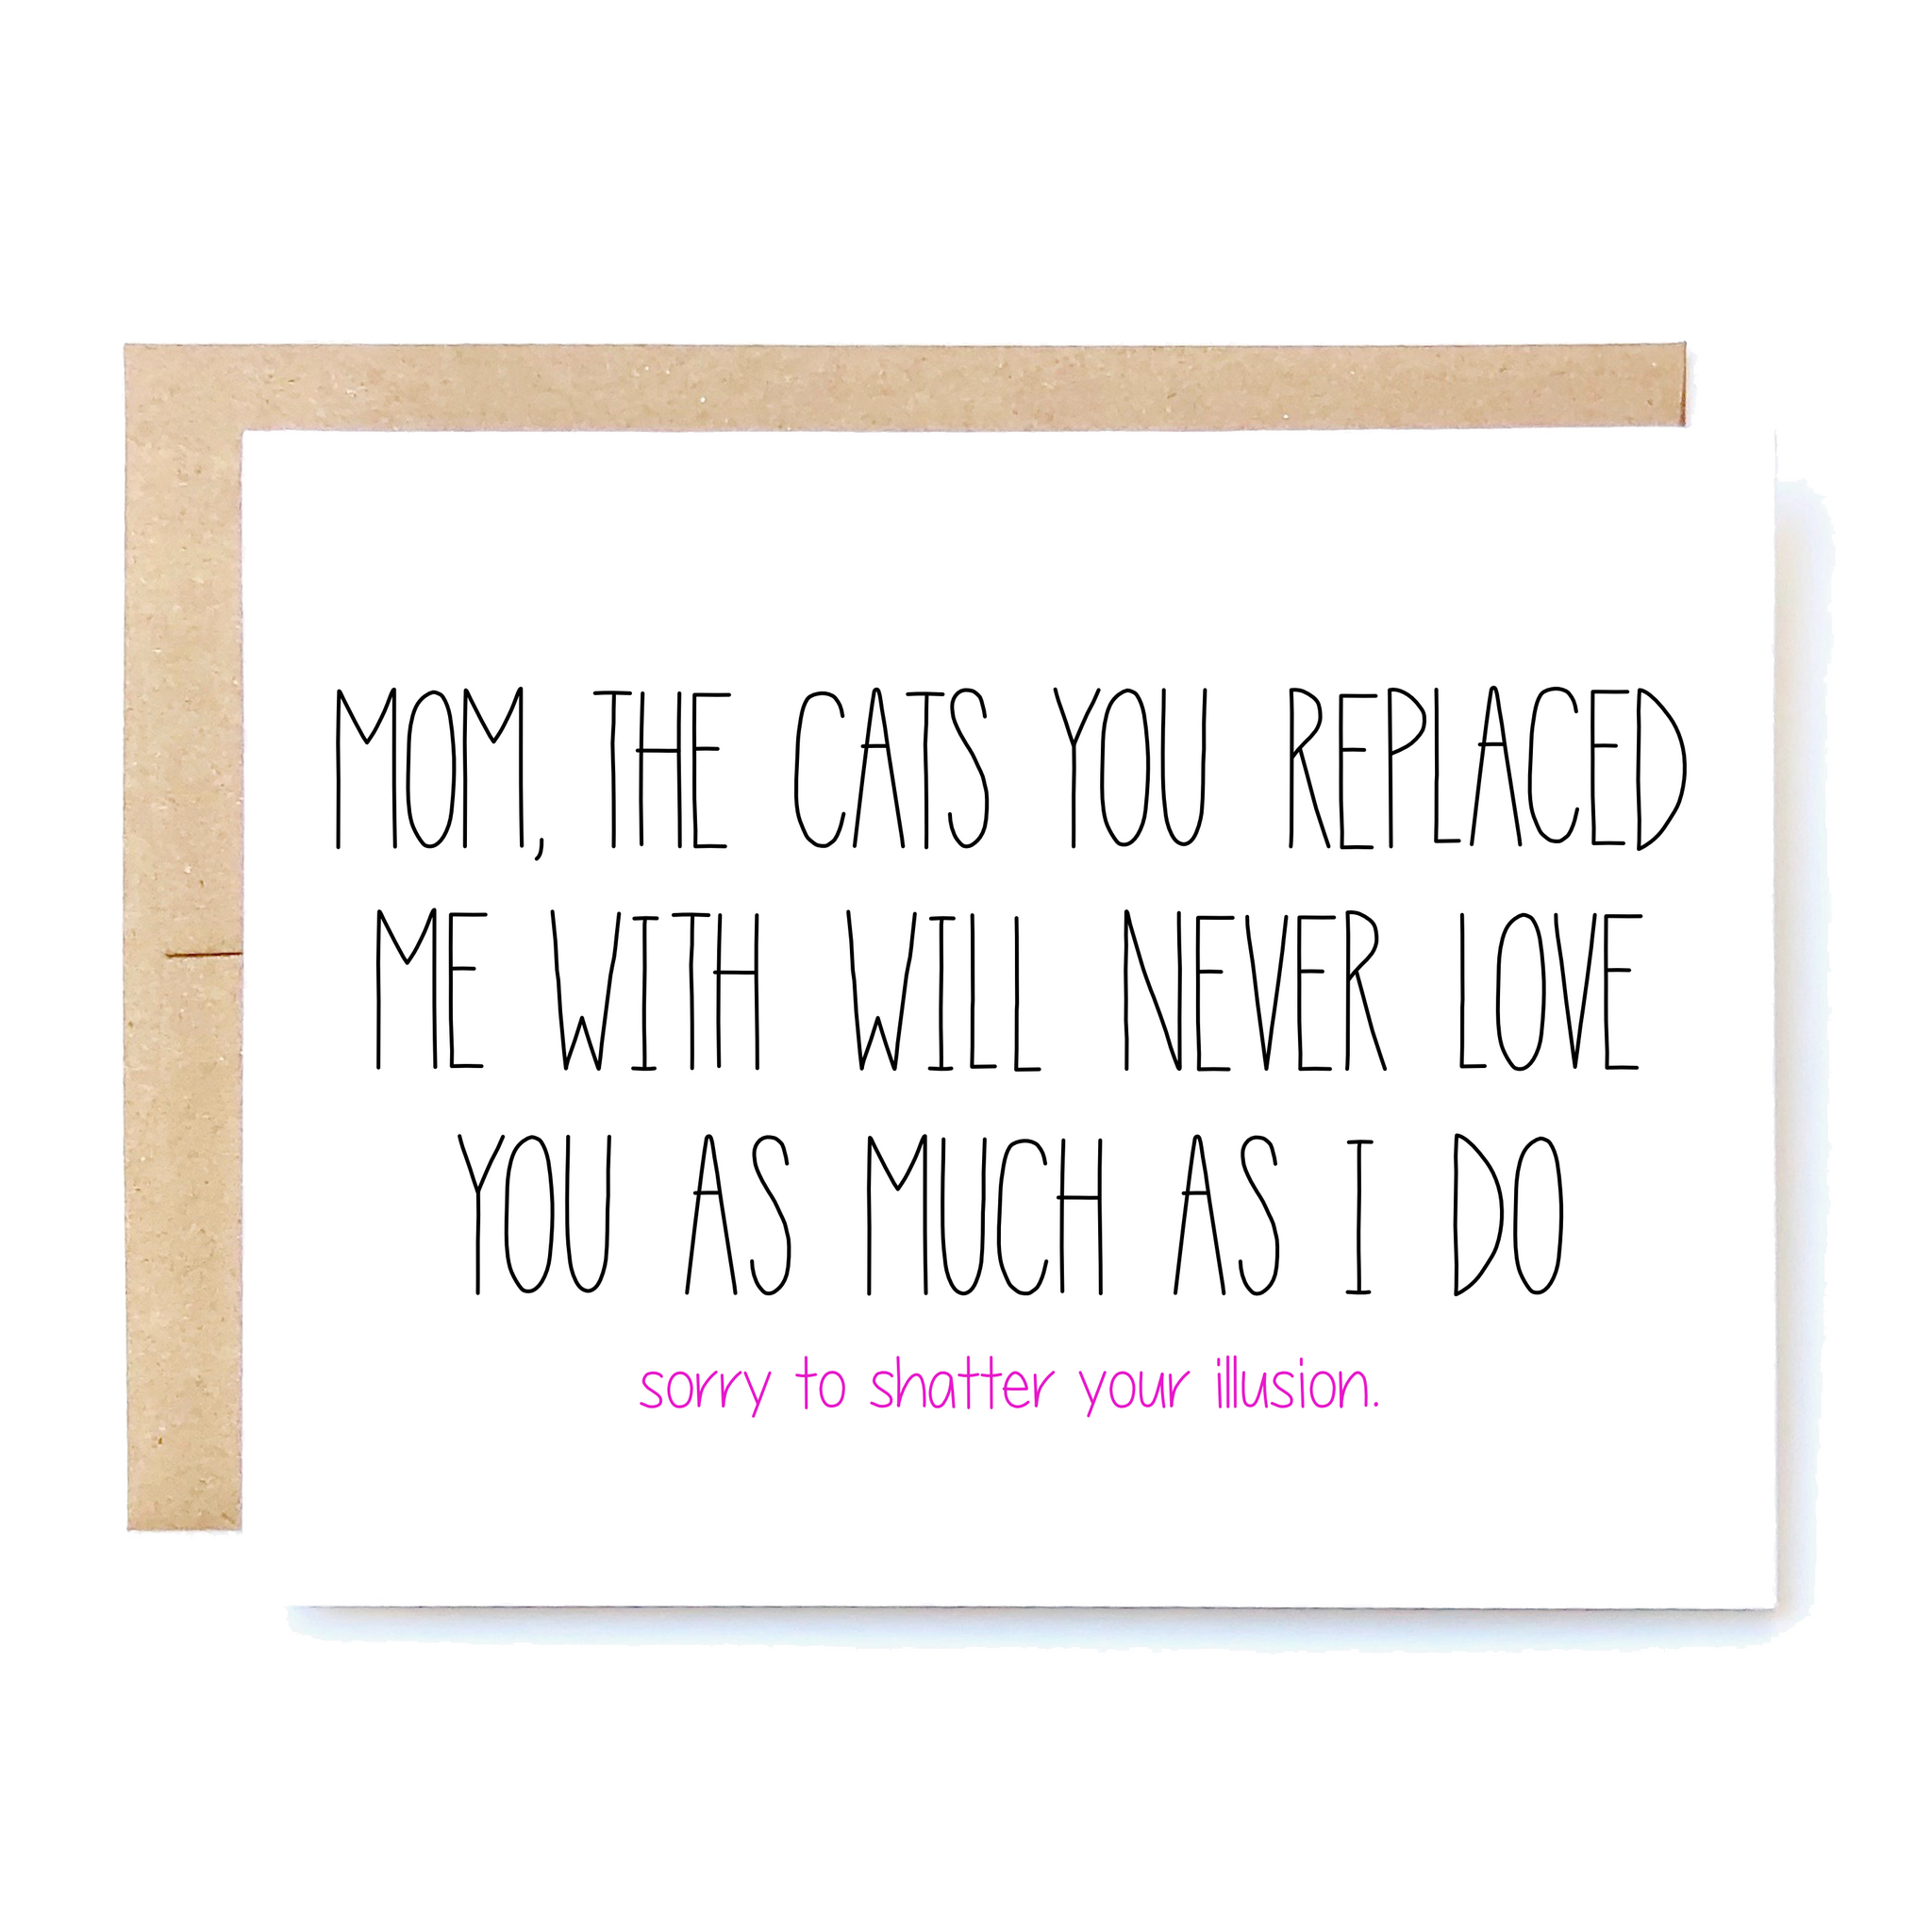 Card Front: Mom, the cats you replaced me with will never love you as much as I do. Sorry to shatter your illusion. 